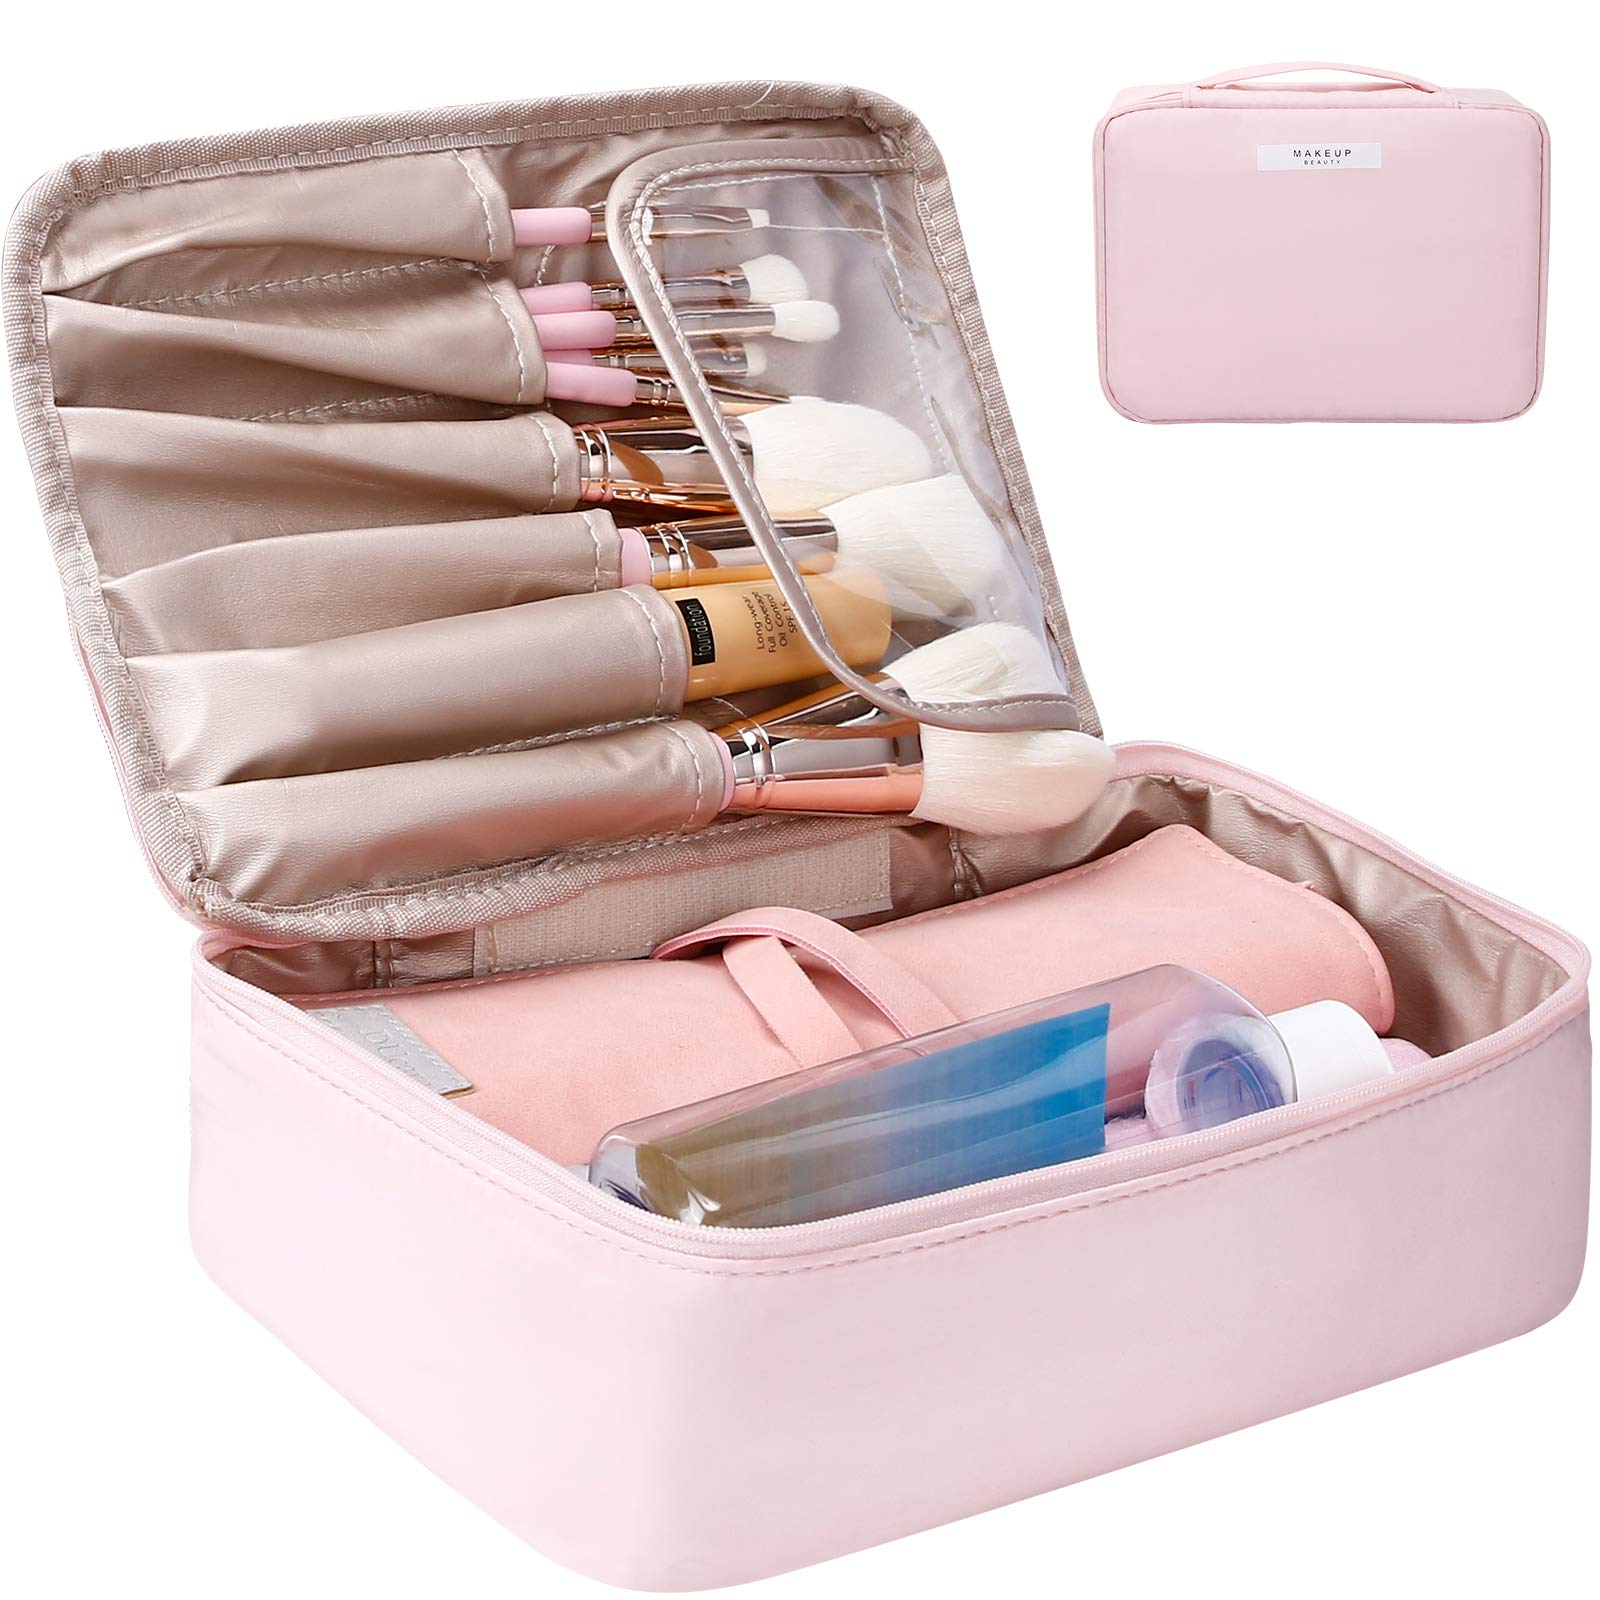 Docolor Travel Makeup Bags Portable Cosmetic Bag, Makeup case Waterproof Storage Makeup Organizer for Cosmetics, Makeup Brushes and Toiletry Accessories